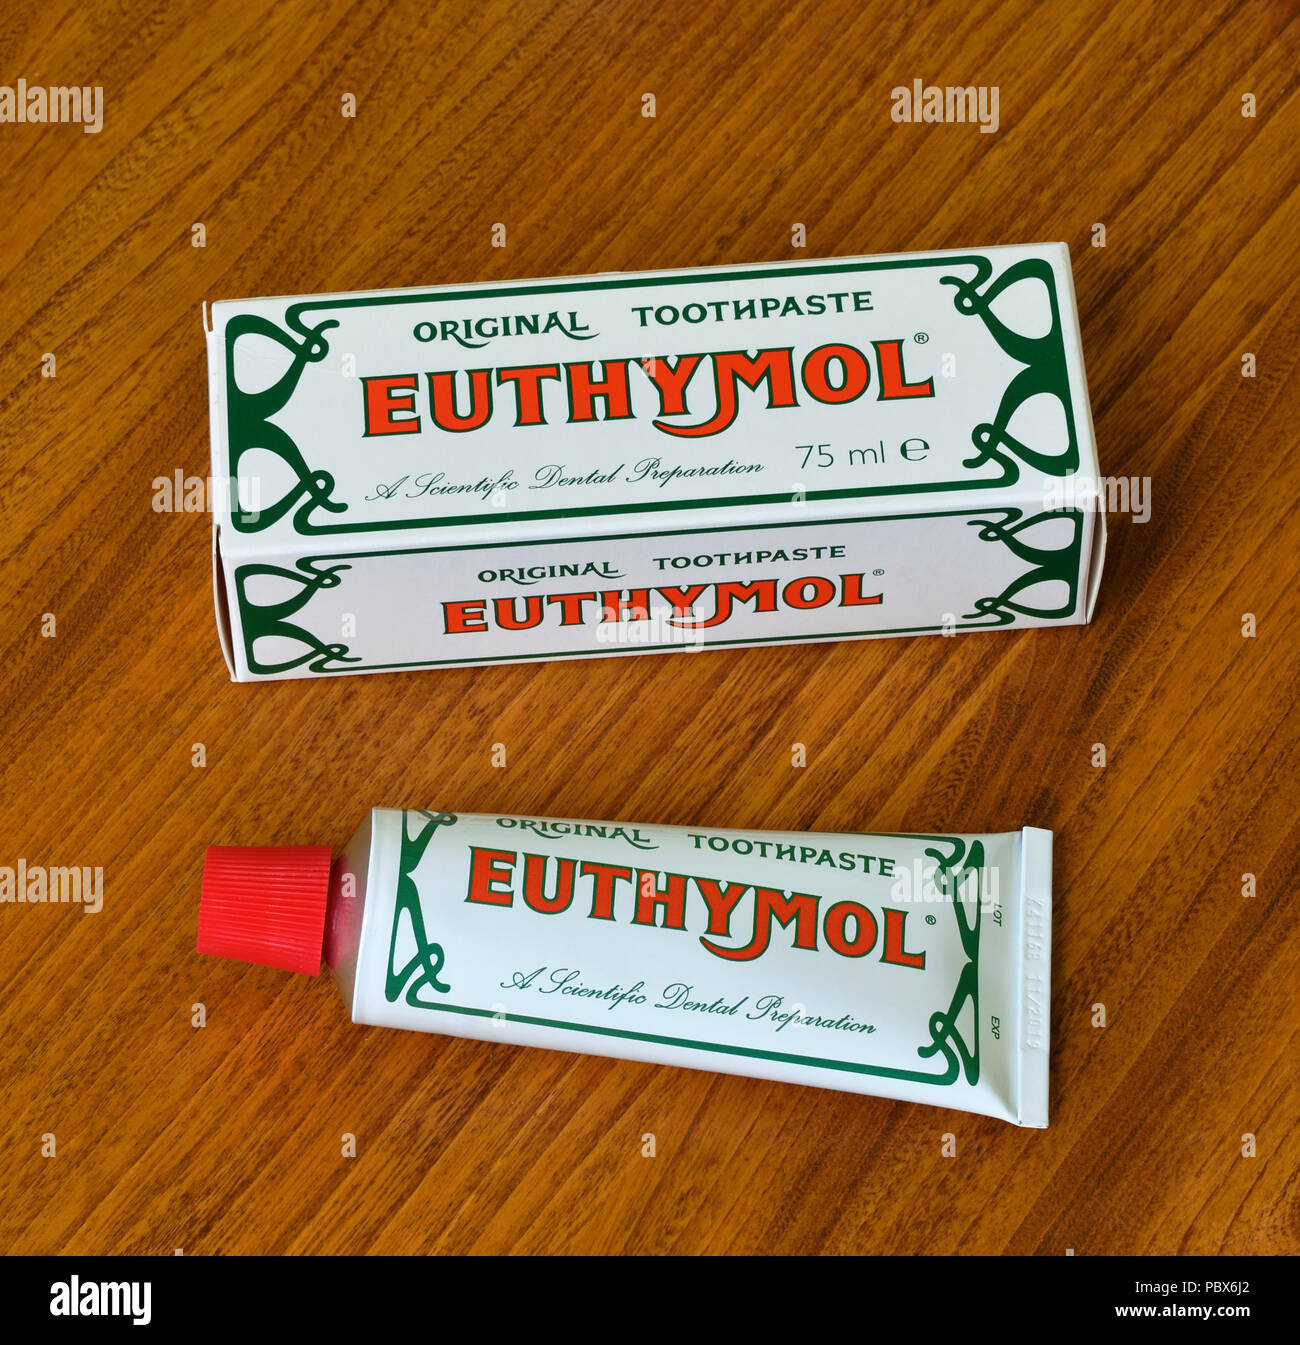 Euthymol Original Toothpaste. A scientific Dental Preparation. 75 ml. tube  and cardboard box container Stock Photo - Alamy